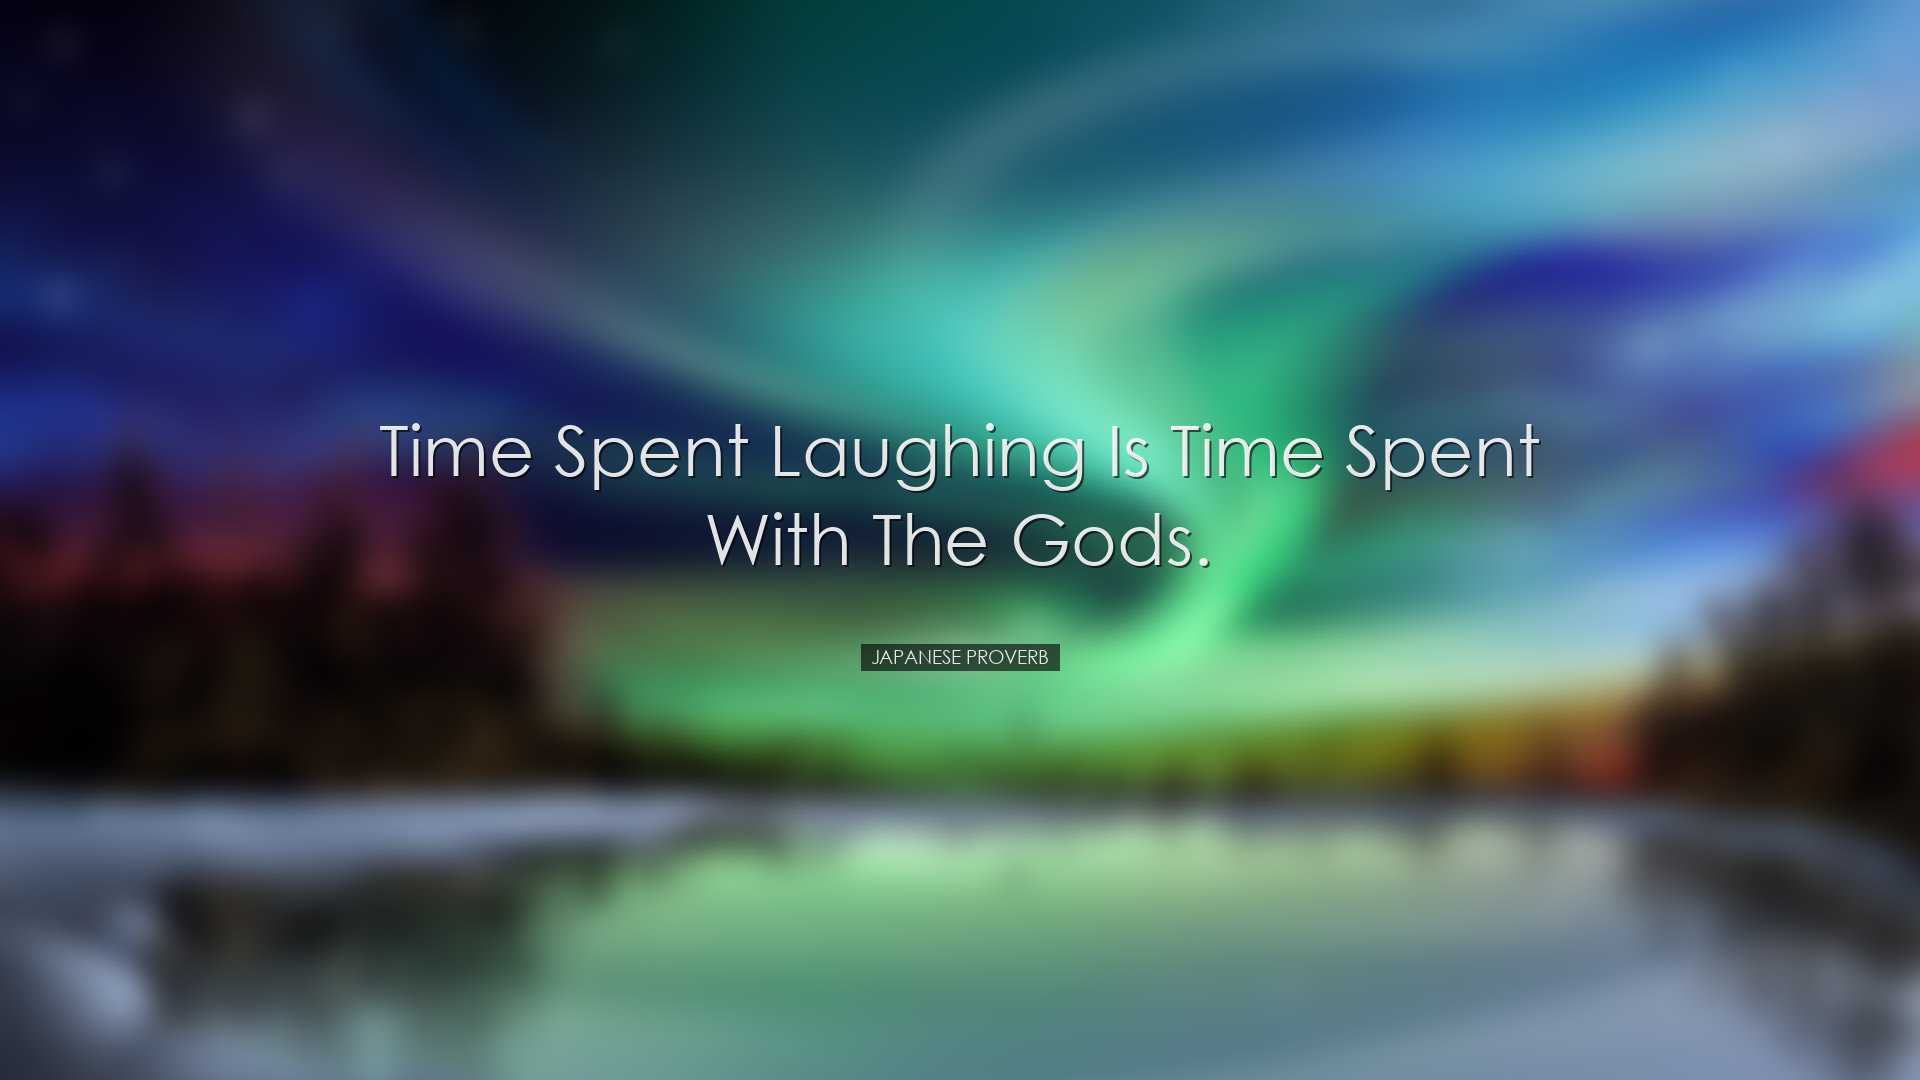 Time spent laughing is time spent with the Gods. - Japanese Prover